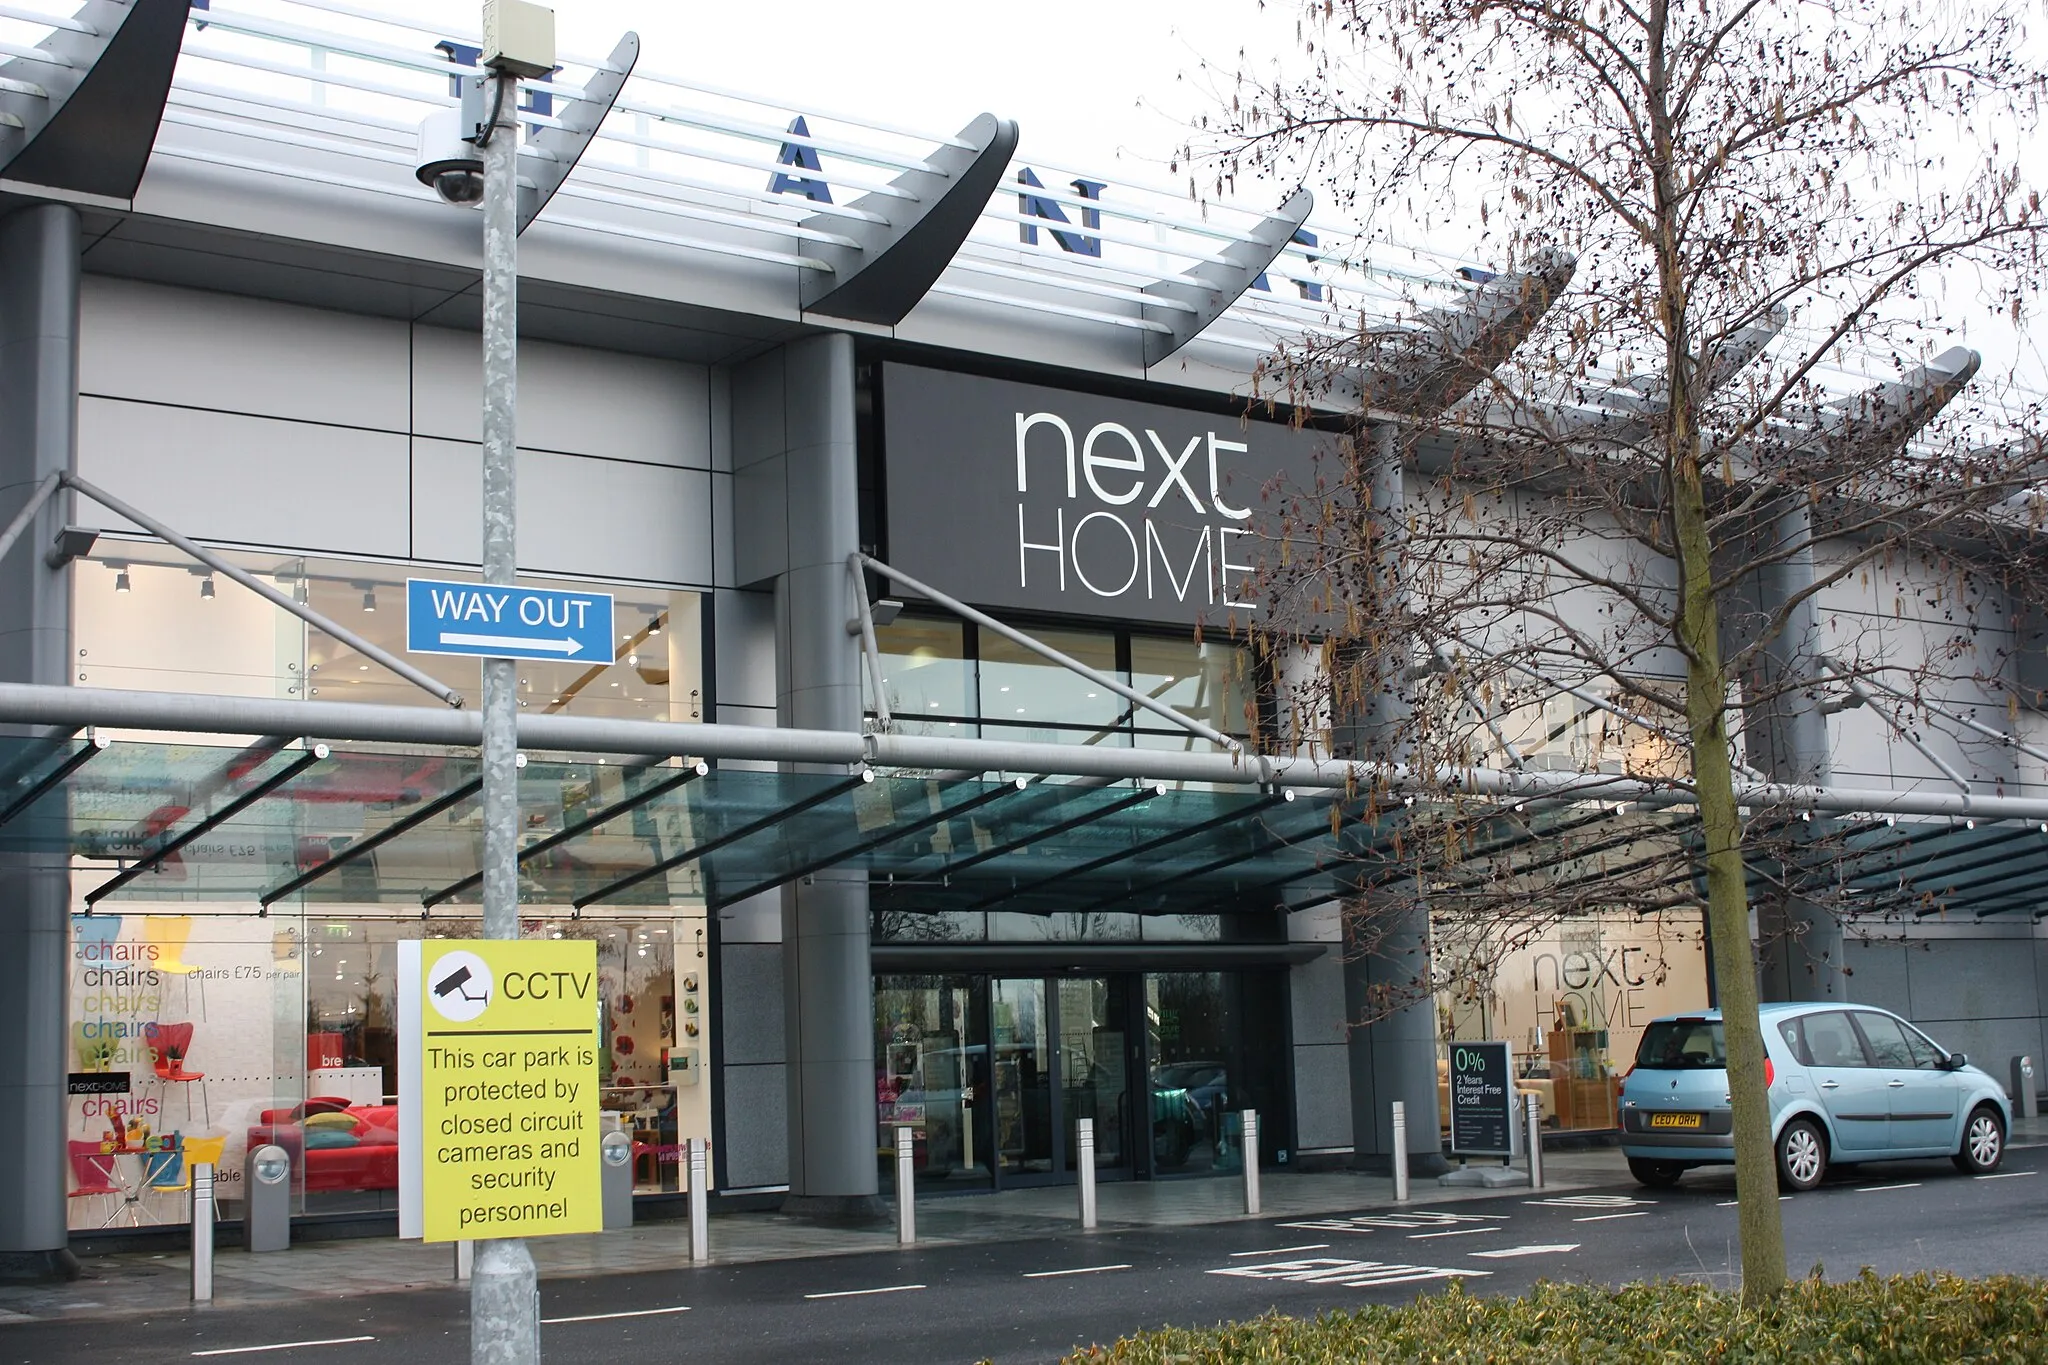 Photo showing: Next Home, Holywood Exchange, Airport Road West, Belfast, Northern Ireland, February 2010